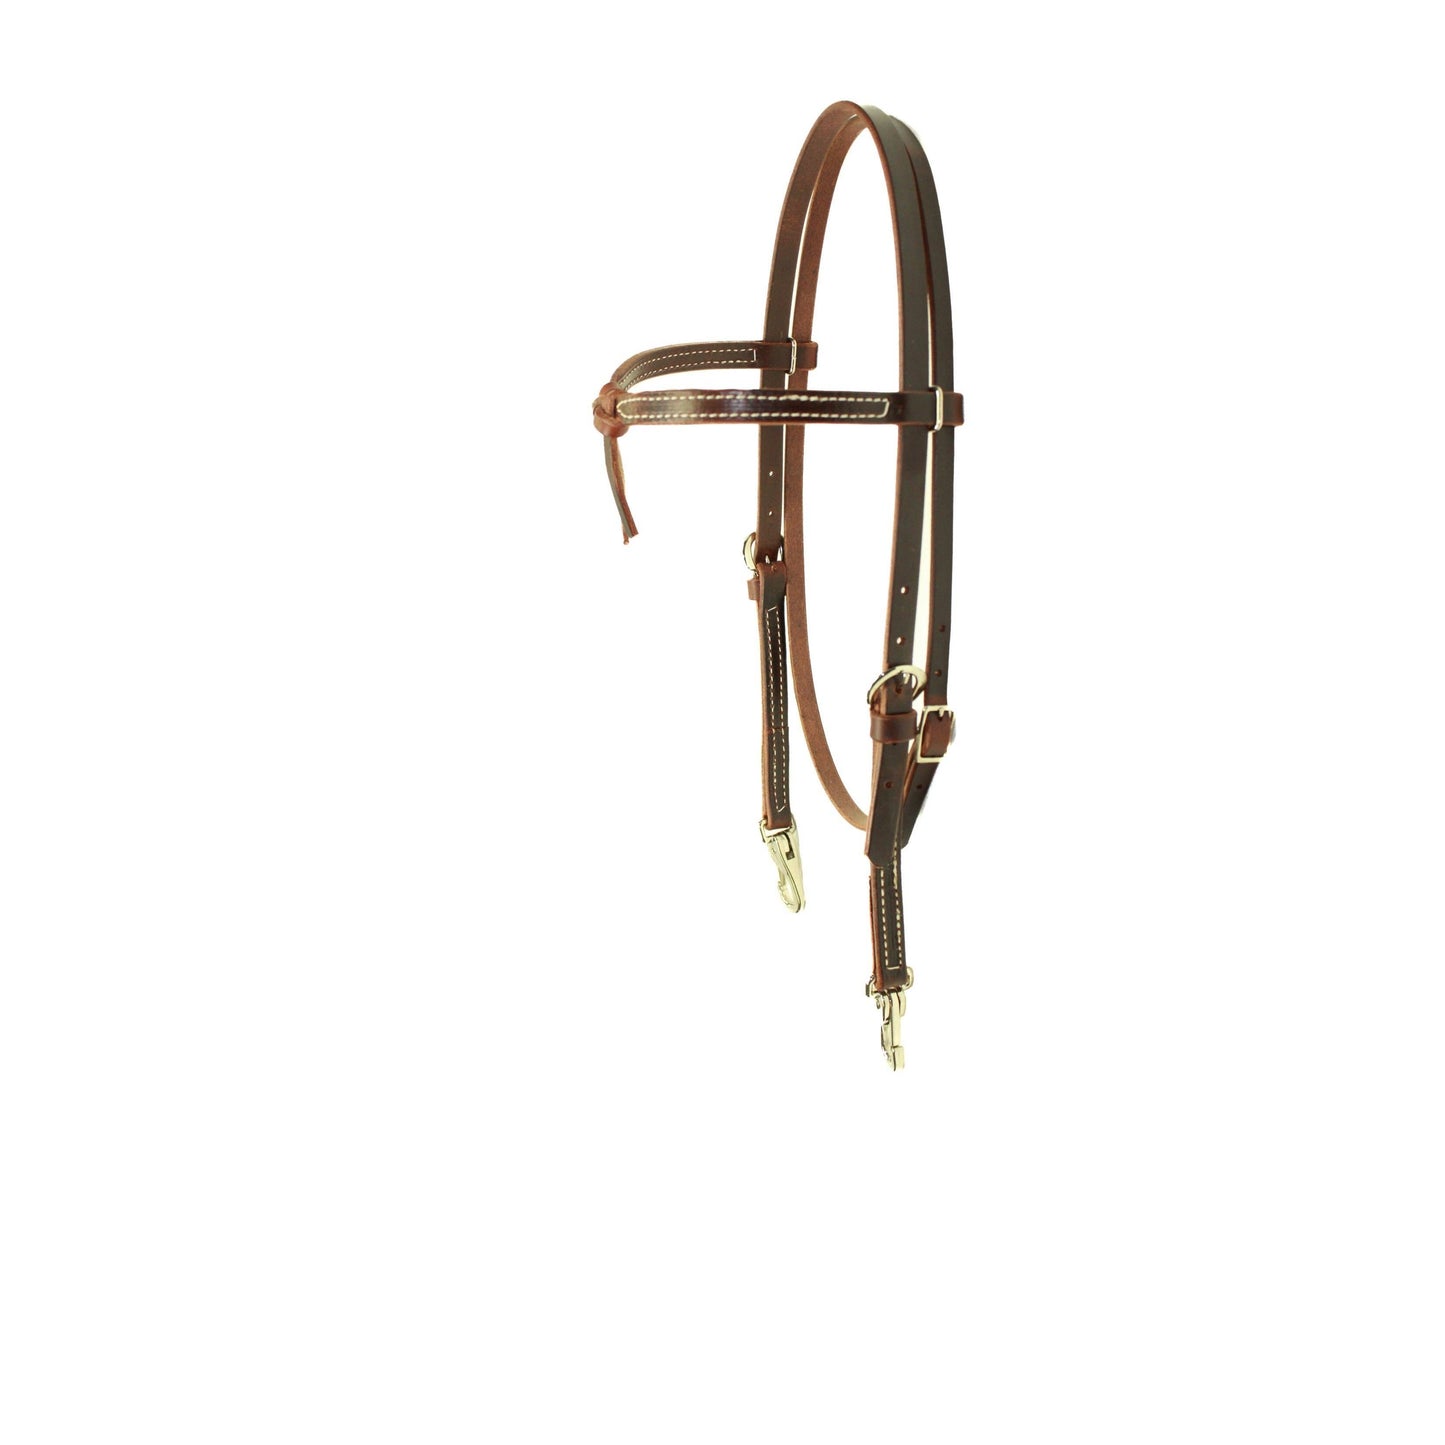 Knotted Brow Headstall